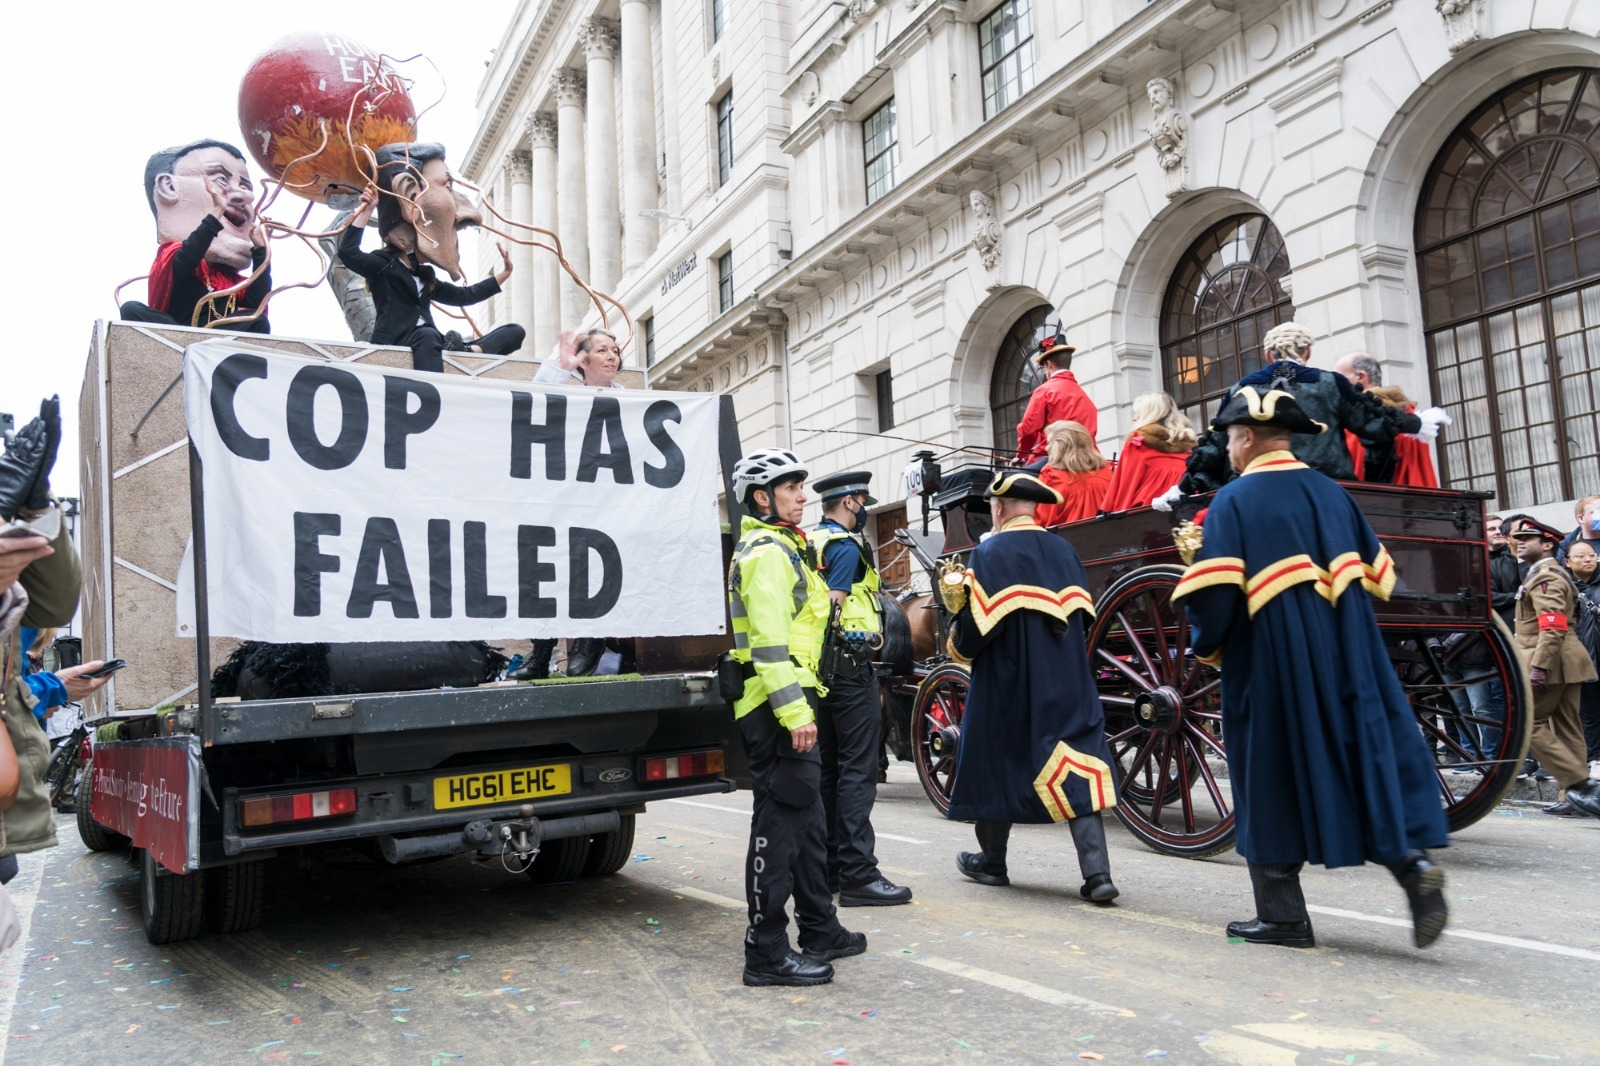 A float with puppets of political figures and a red hot world and a banner that says COP has failed. Police surround it while the Lord Mayor's carriage passes with men in pompous traditional uniforms inside